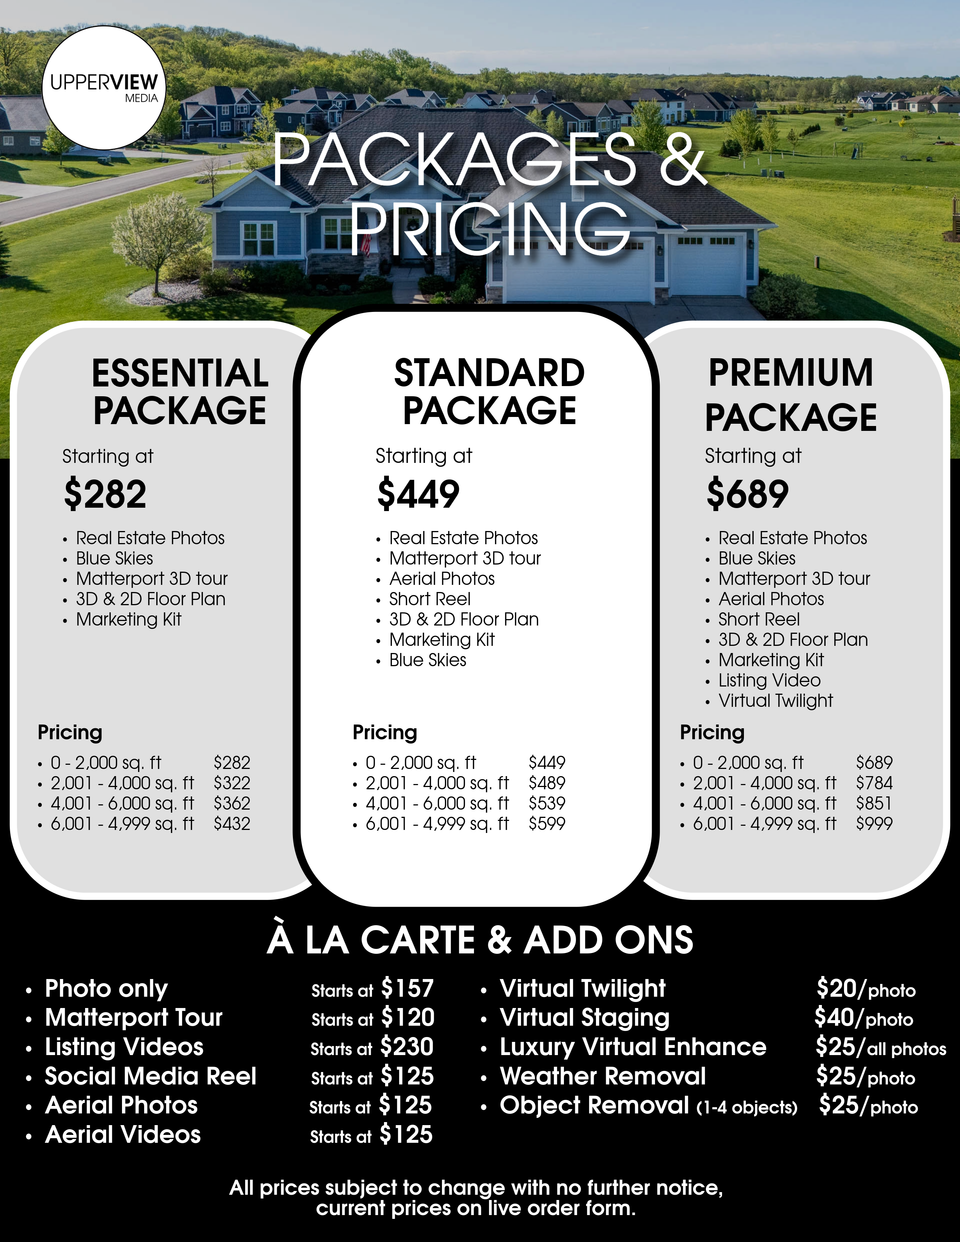 Upperview pricing 2 pricing 06 18 24